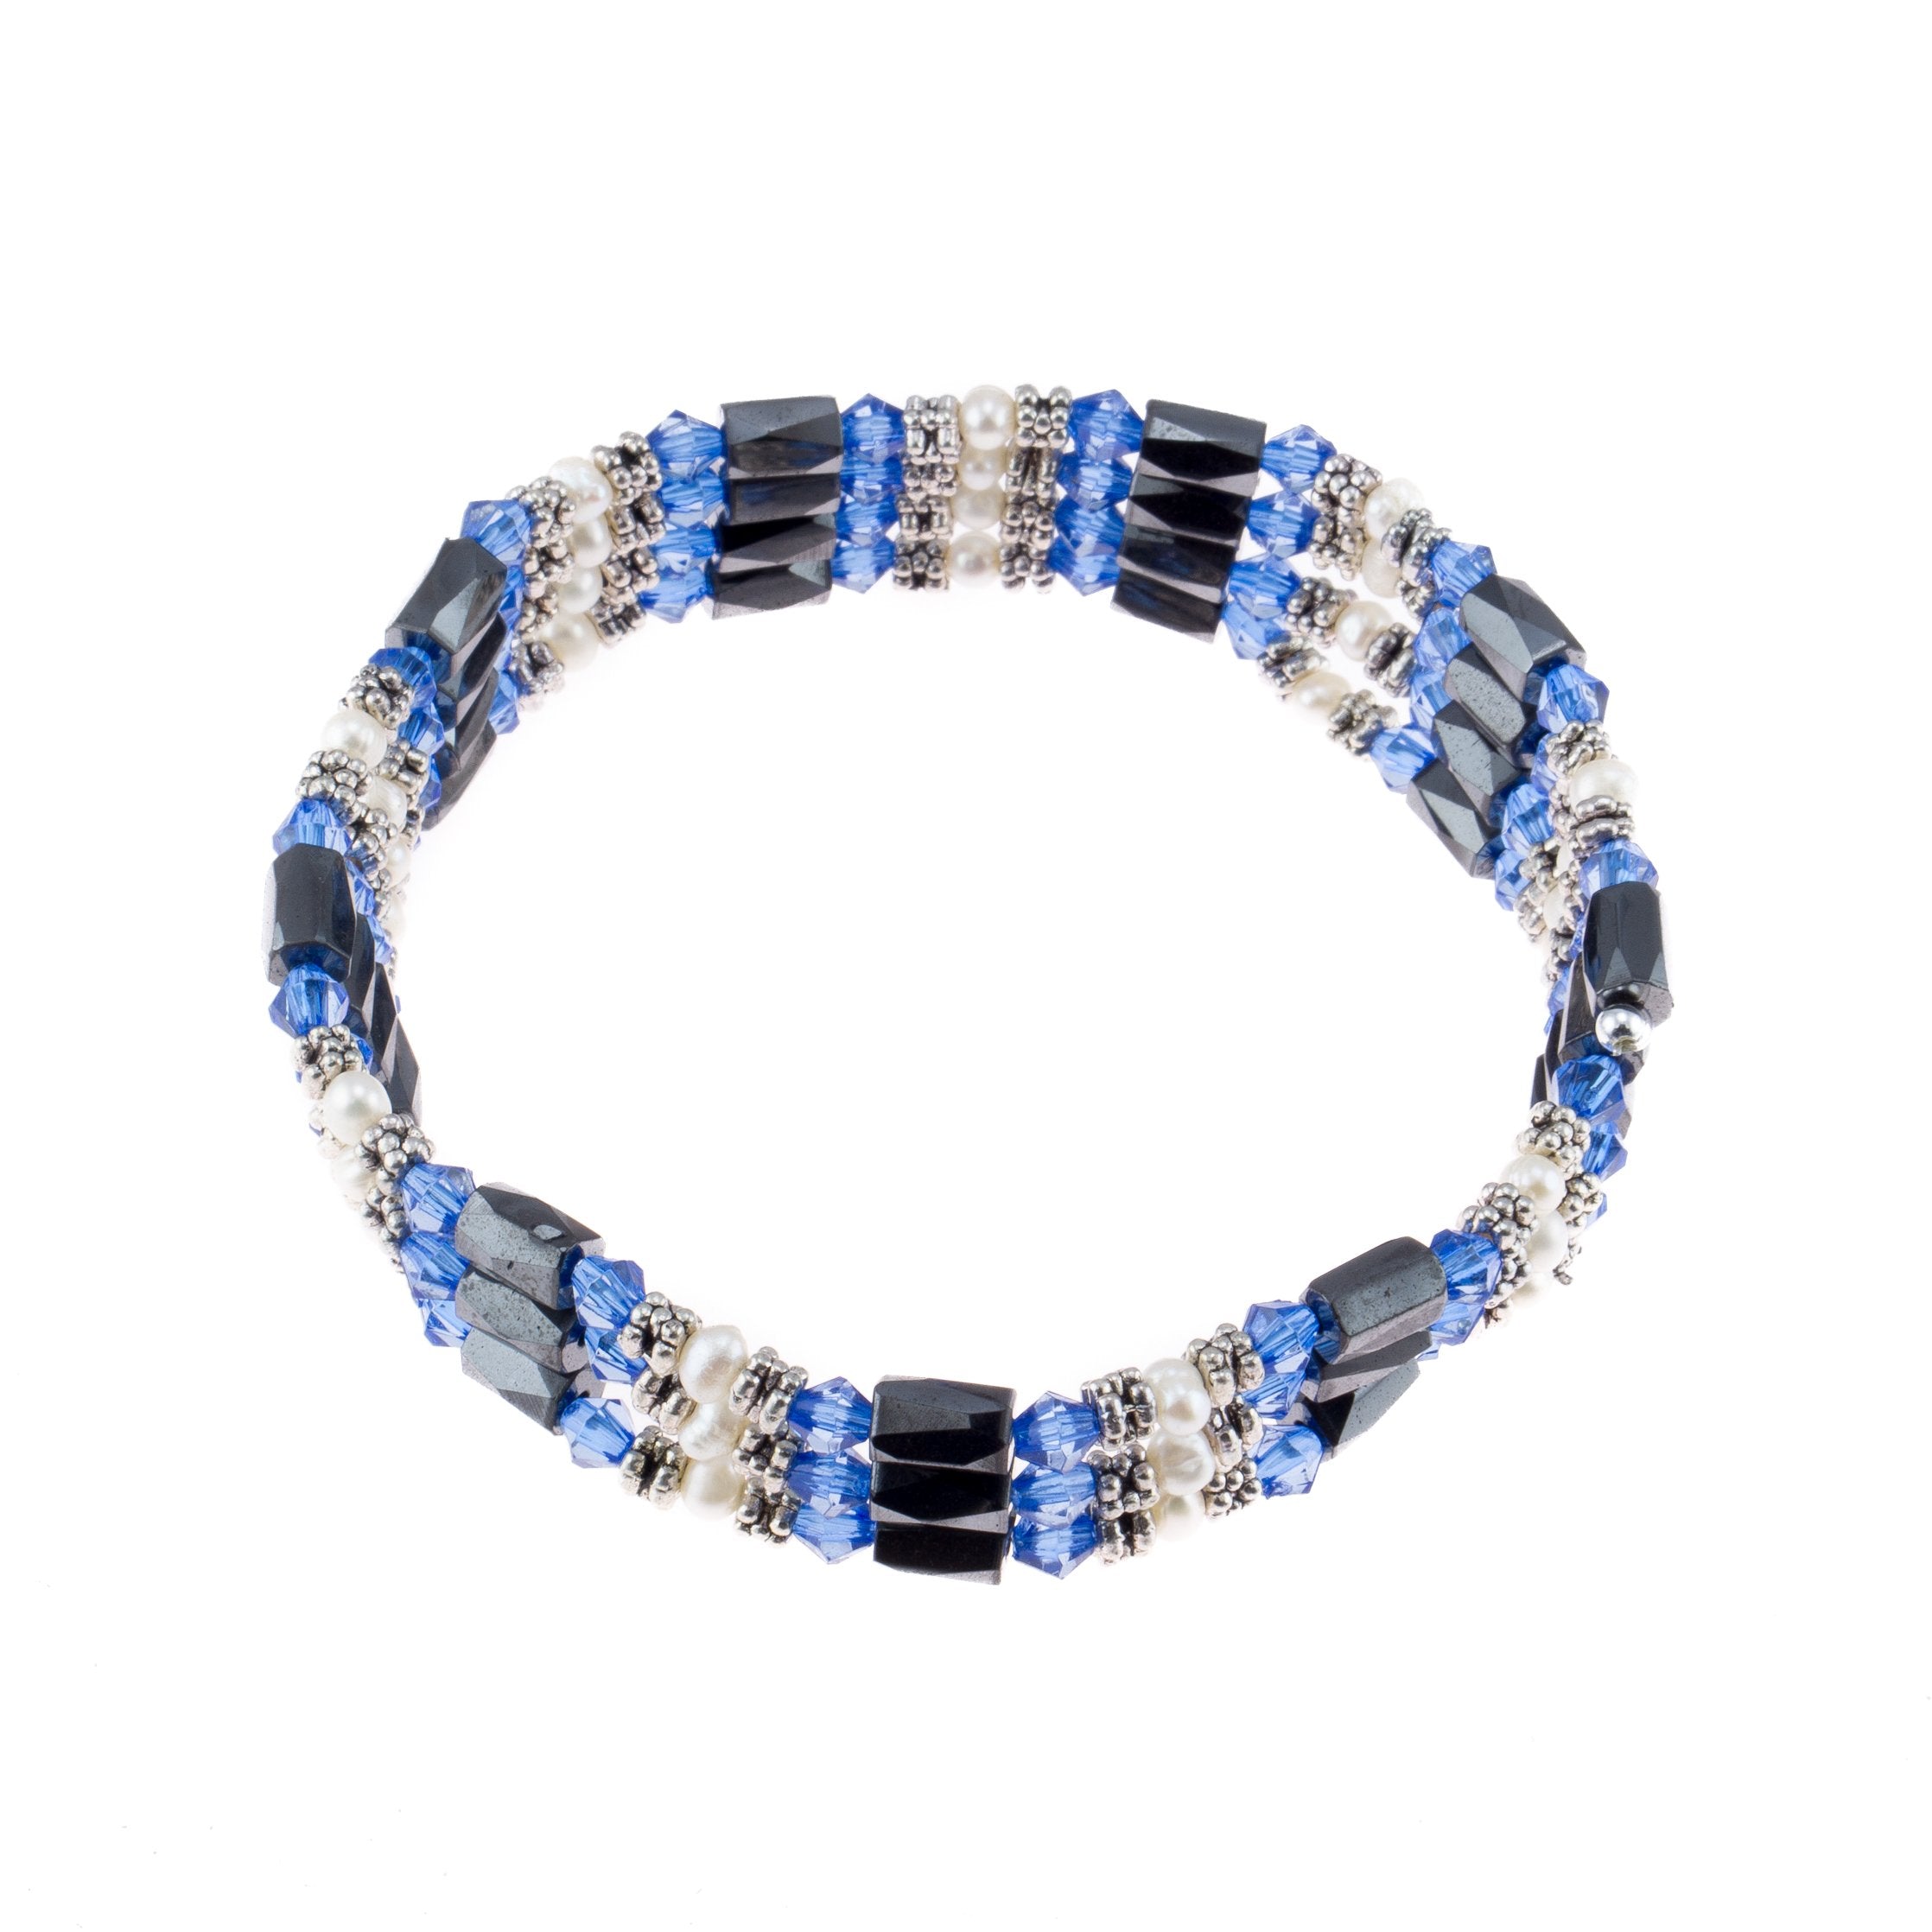 Magnetic Hematite Beaded Wrap Bracelet, Anklet or Necklace with Genuine Fresh Water Pearls (Blue)